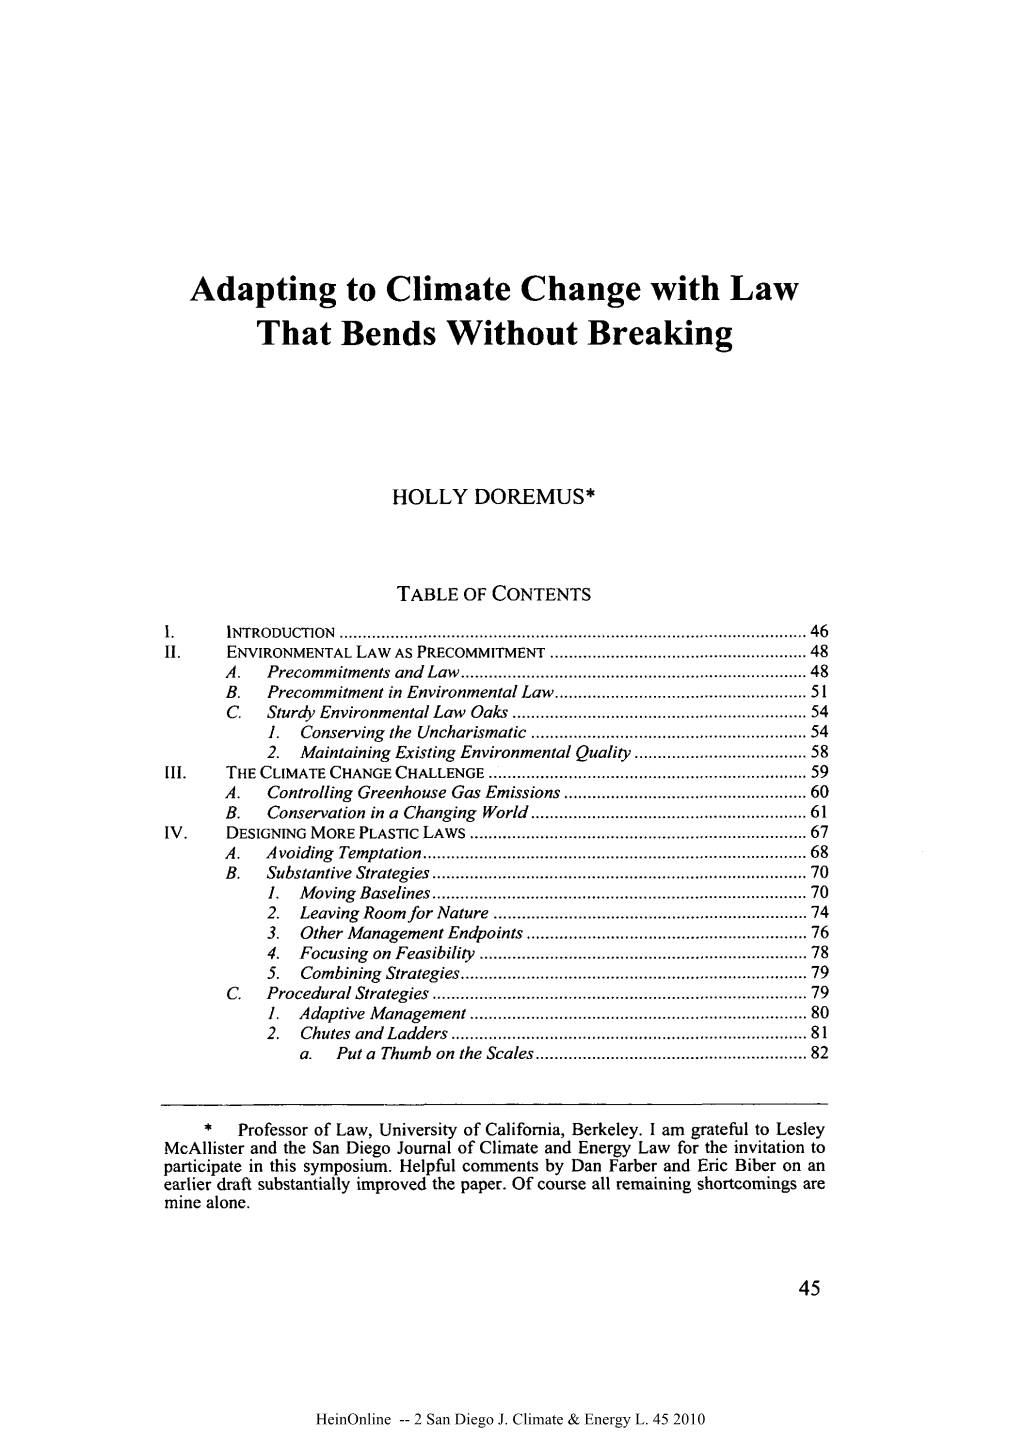 Adapting to Climate Change with Law That Bends Without Breaking